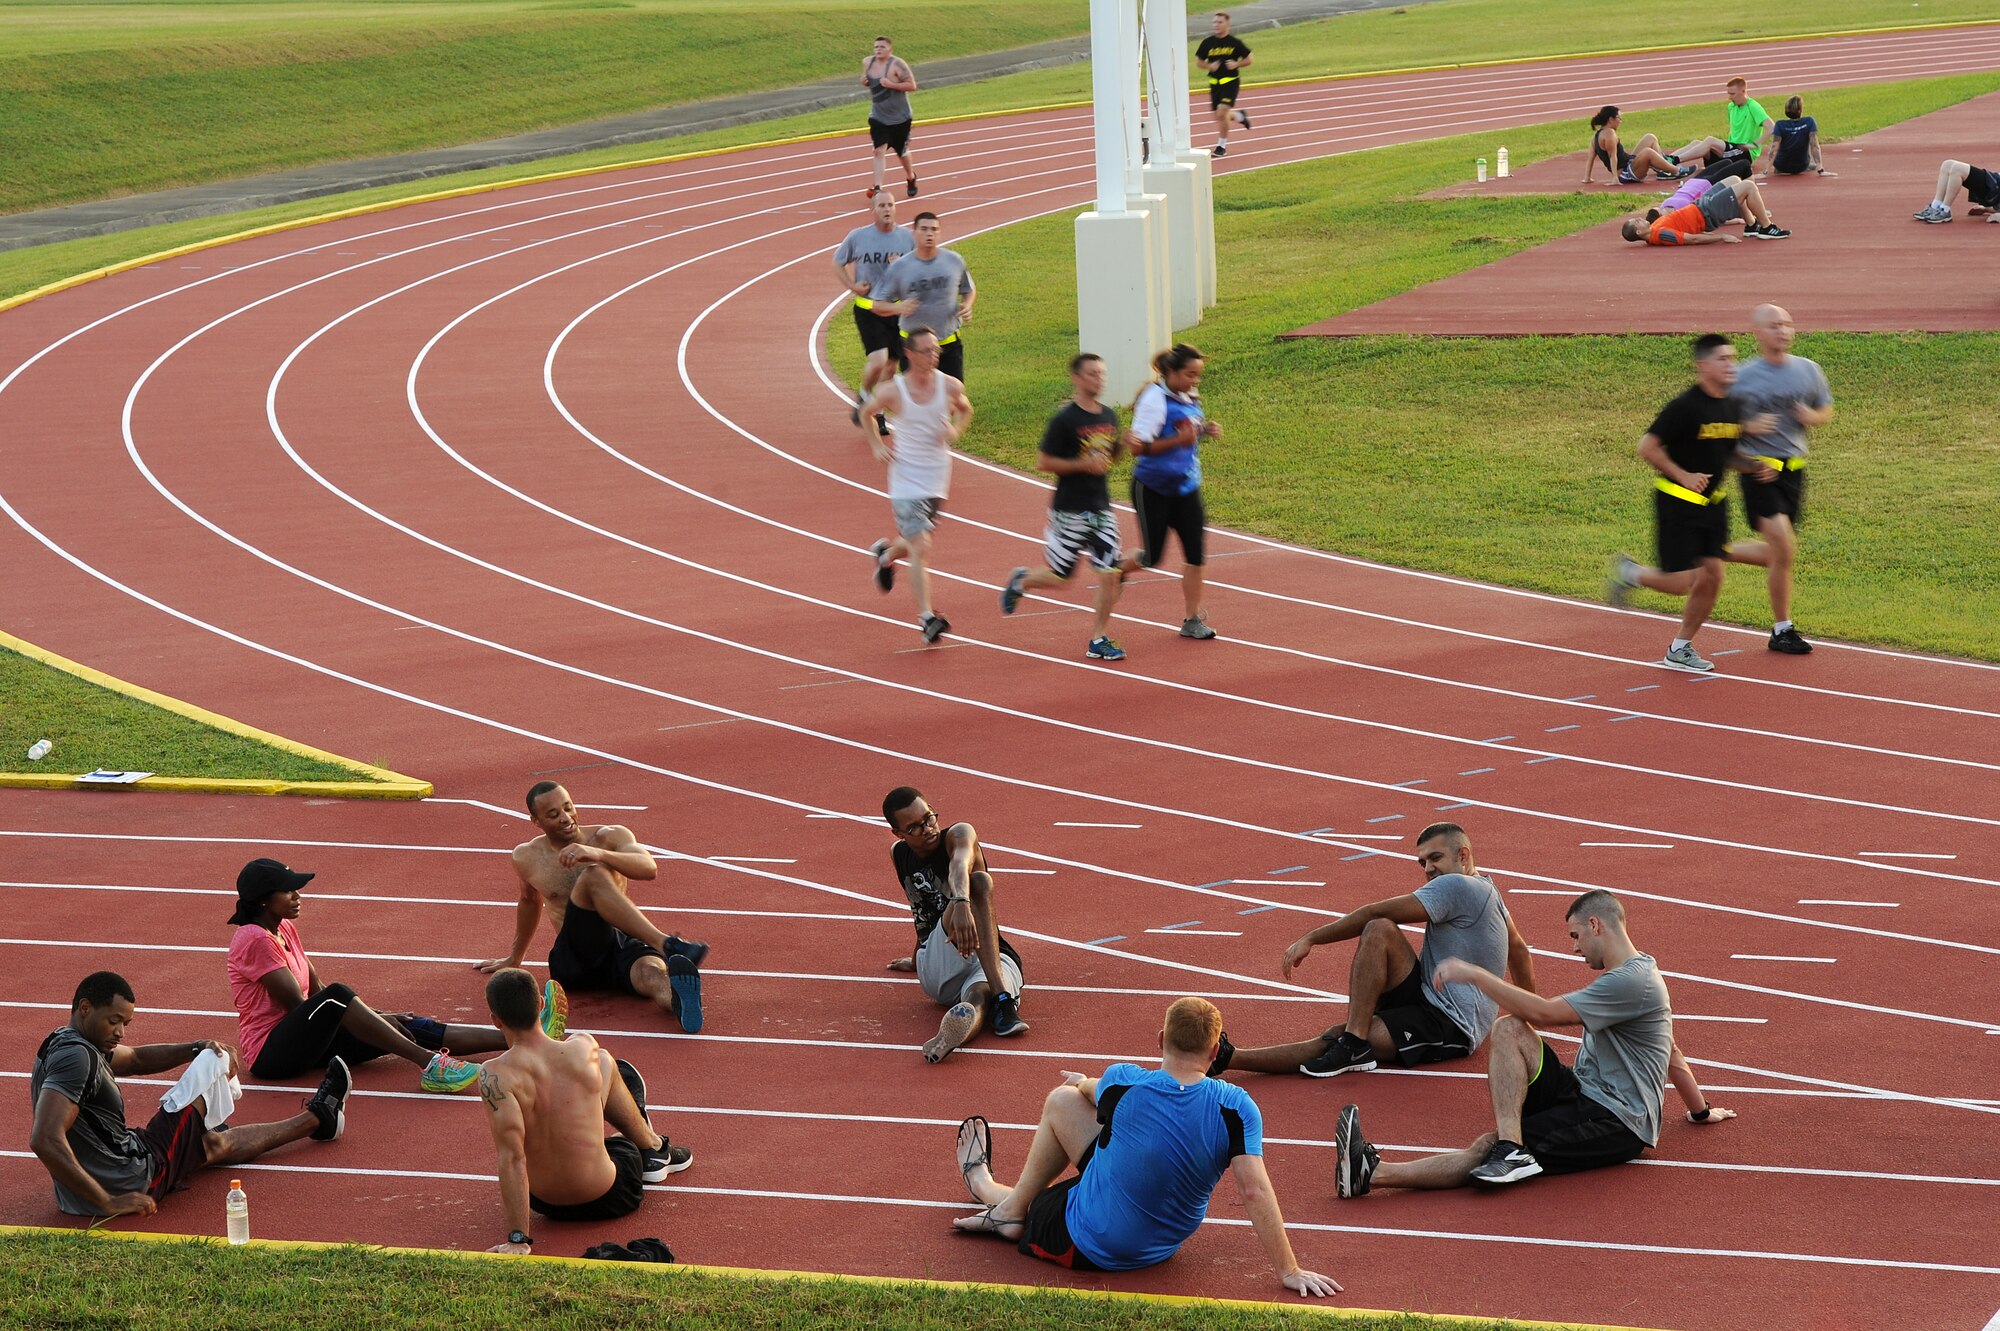 Several small groups of participants in the first session of Kadena Air Base’s running improvement program work out and perform post-run stretches on the Kadena High School track, Aug. 5, 2015. The running improvement program is an eight-week program designed to improve particpants’ run times while educating them on proper form. Historically, participants average a 1 minute 45 second improvement on their one and a half mile timed run. (U.S. Air Force photo by Airman 1st Class Zade C. Vadnais) 